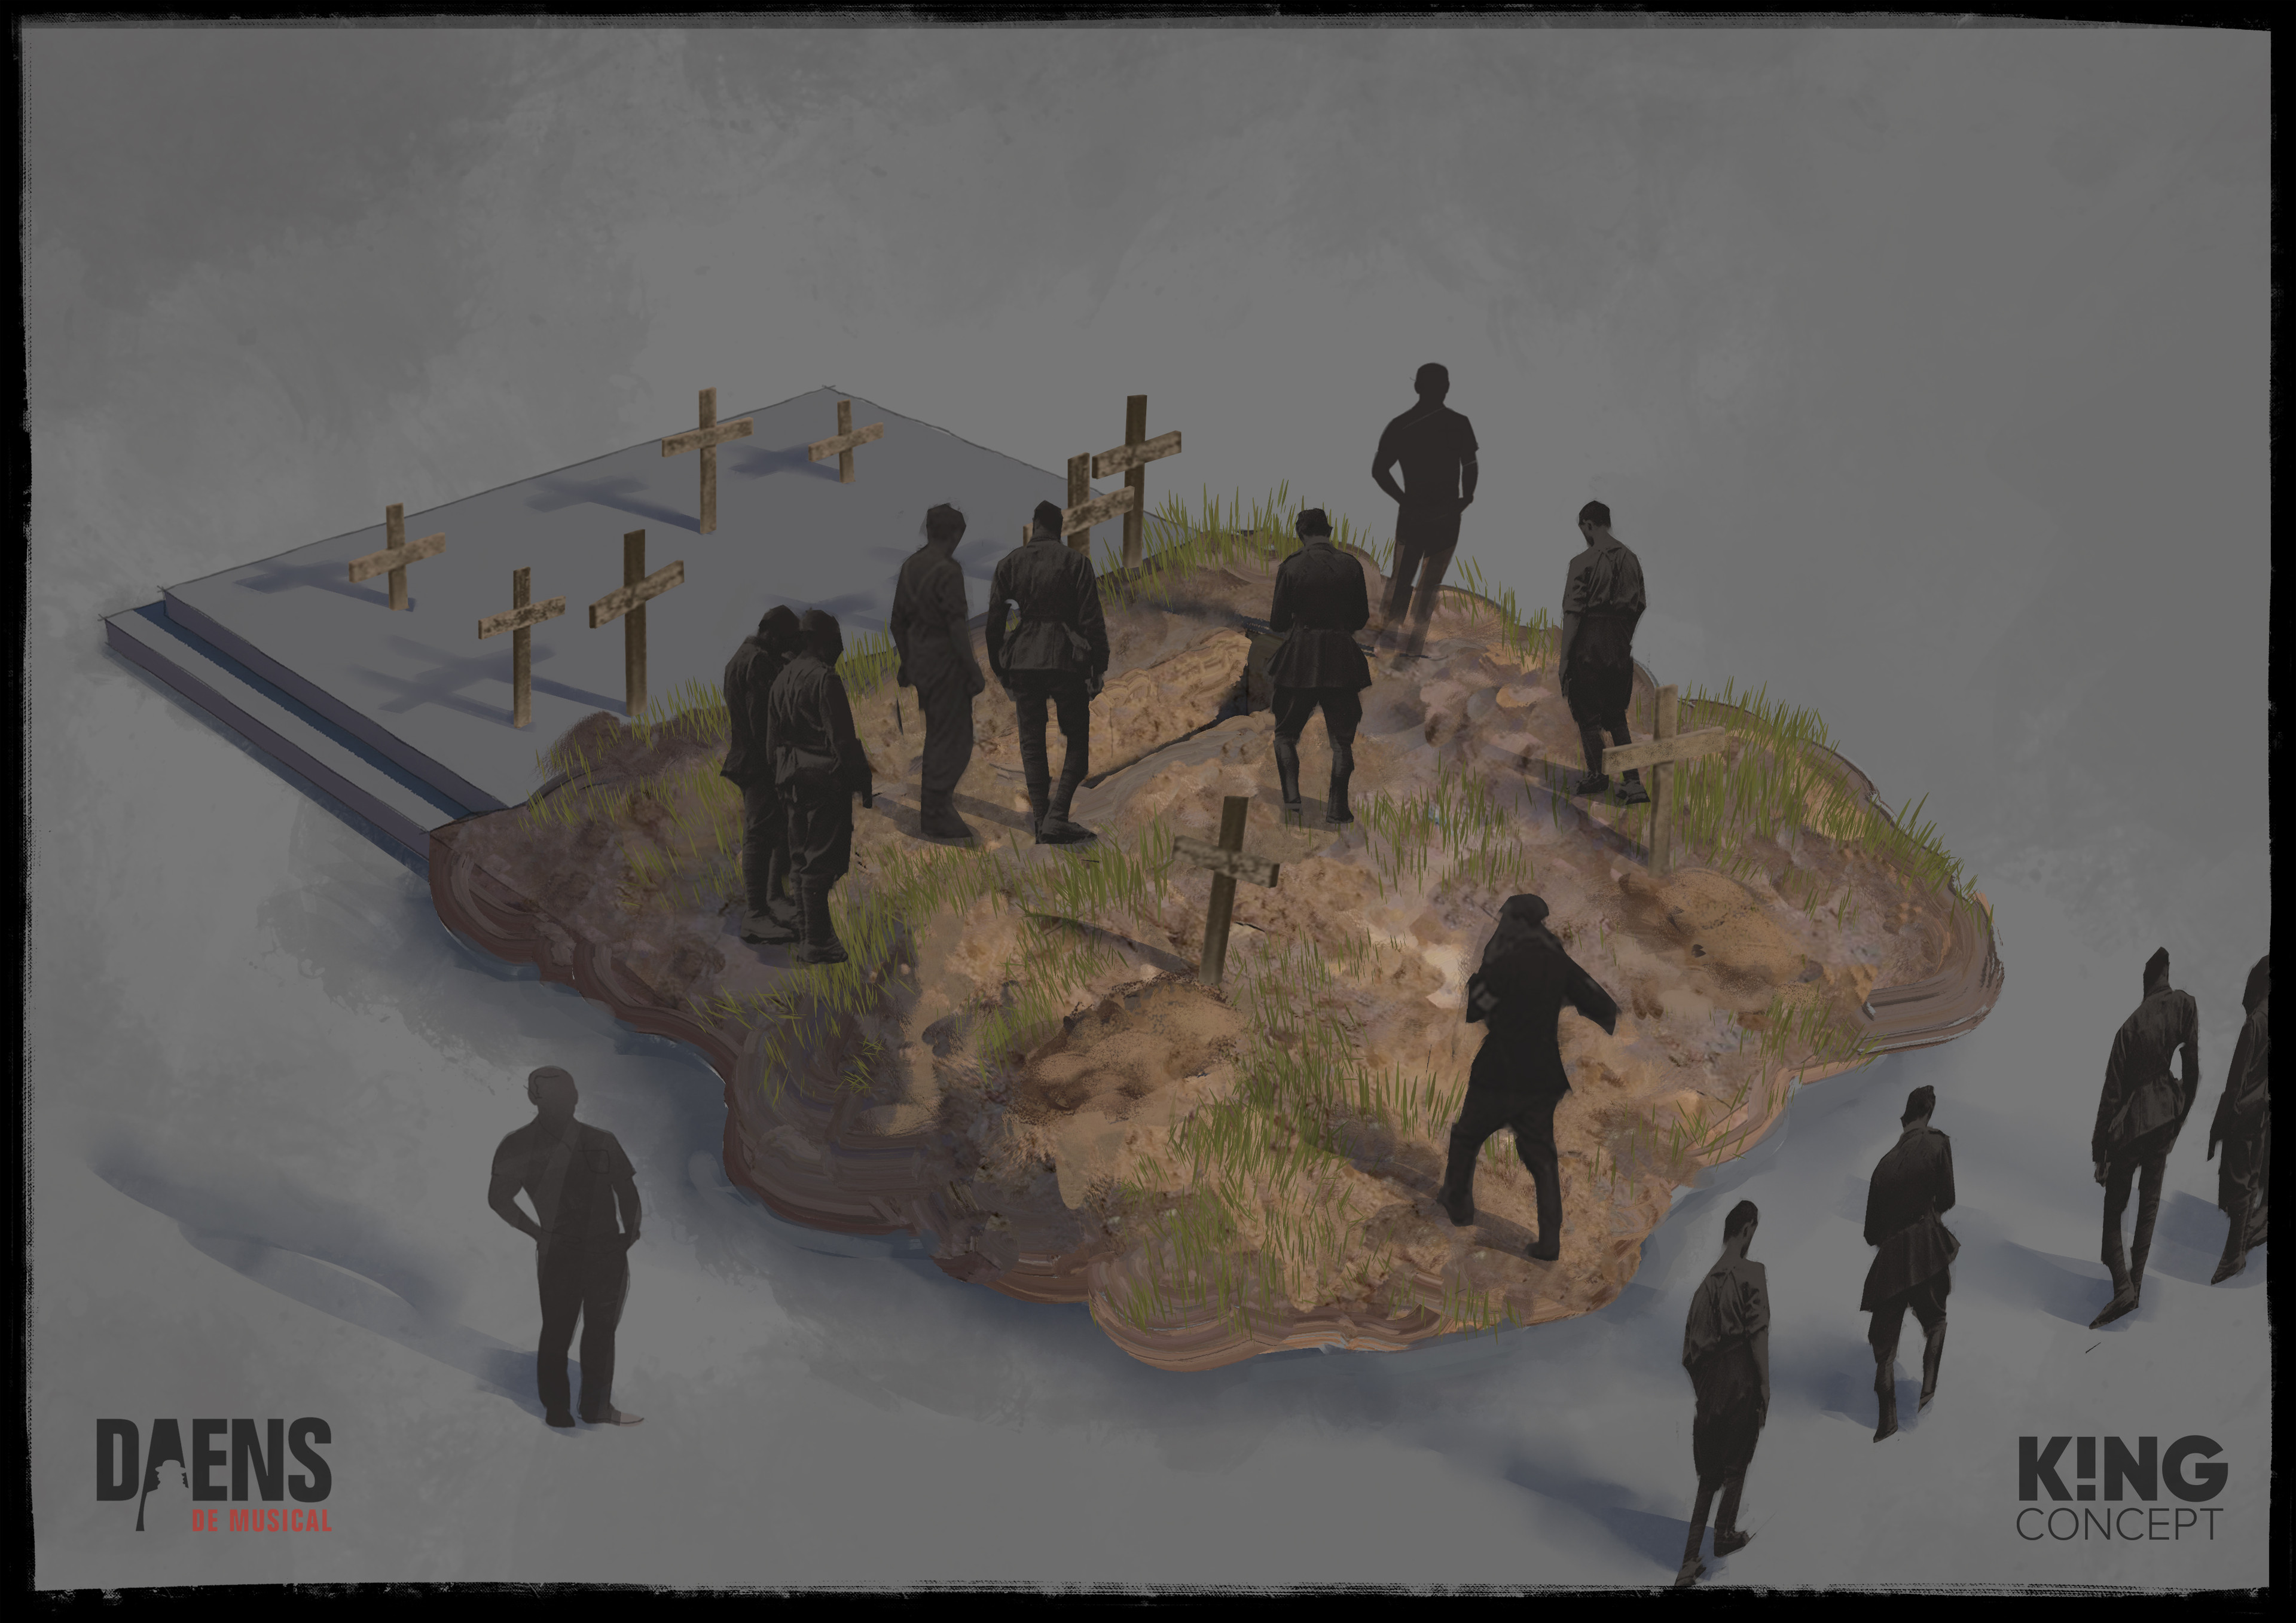 Concept for a set extension used during the burial scene.